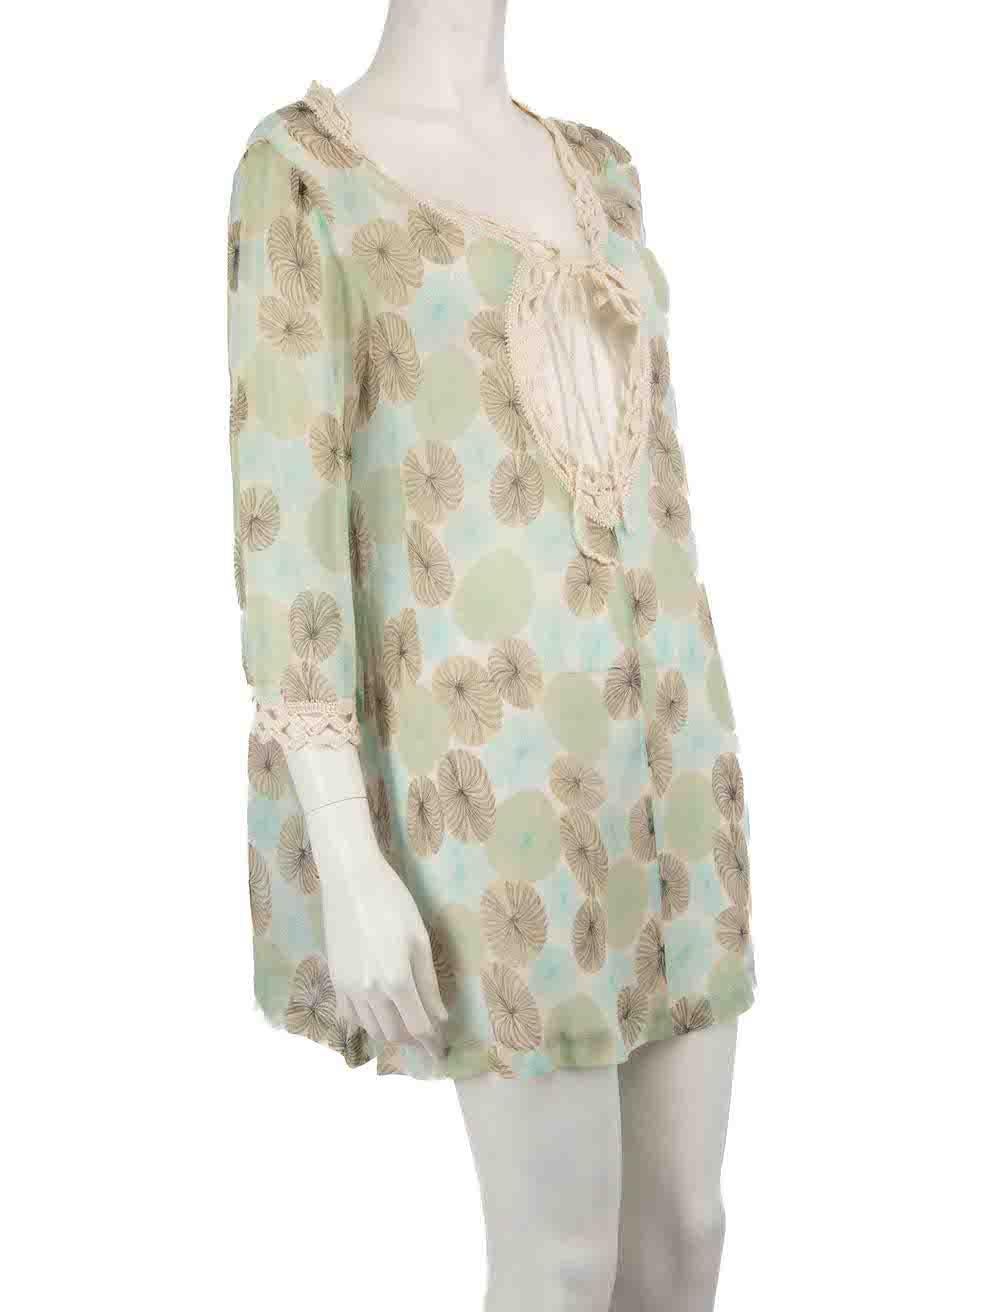 CONDITION is Very good. Minimal wear to dress is evident. There is a small tear to the fabric at the right side underarm seam on this used Diane von Furstenberg designer resale item.
 
 Details
 Green
 Cotton
 Beach cover up top
 Abstract floral